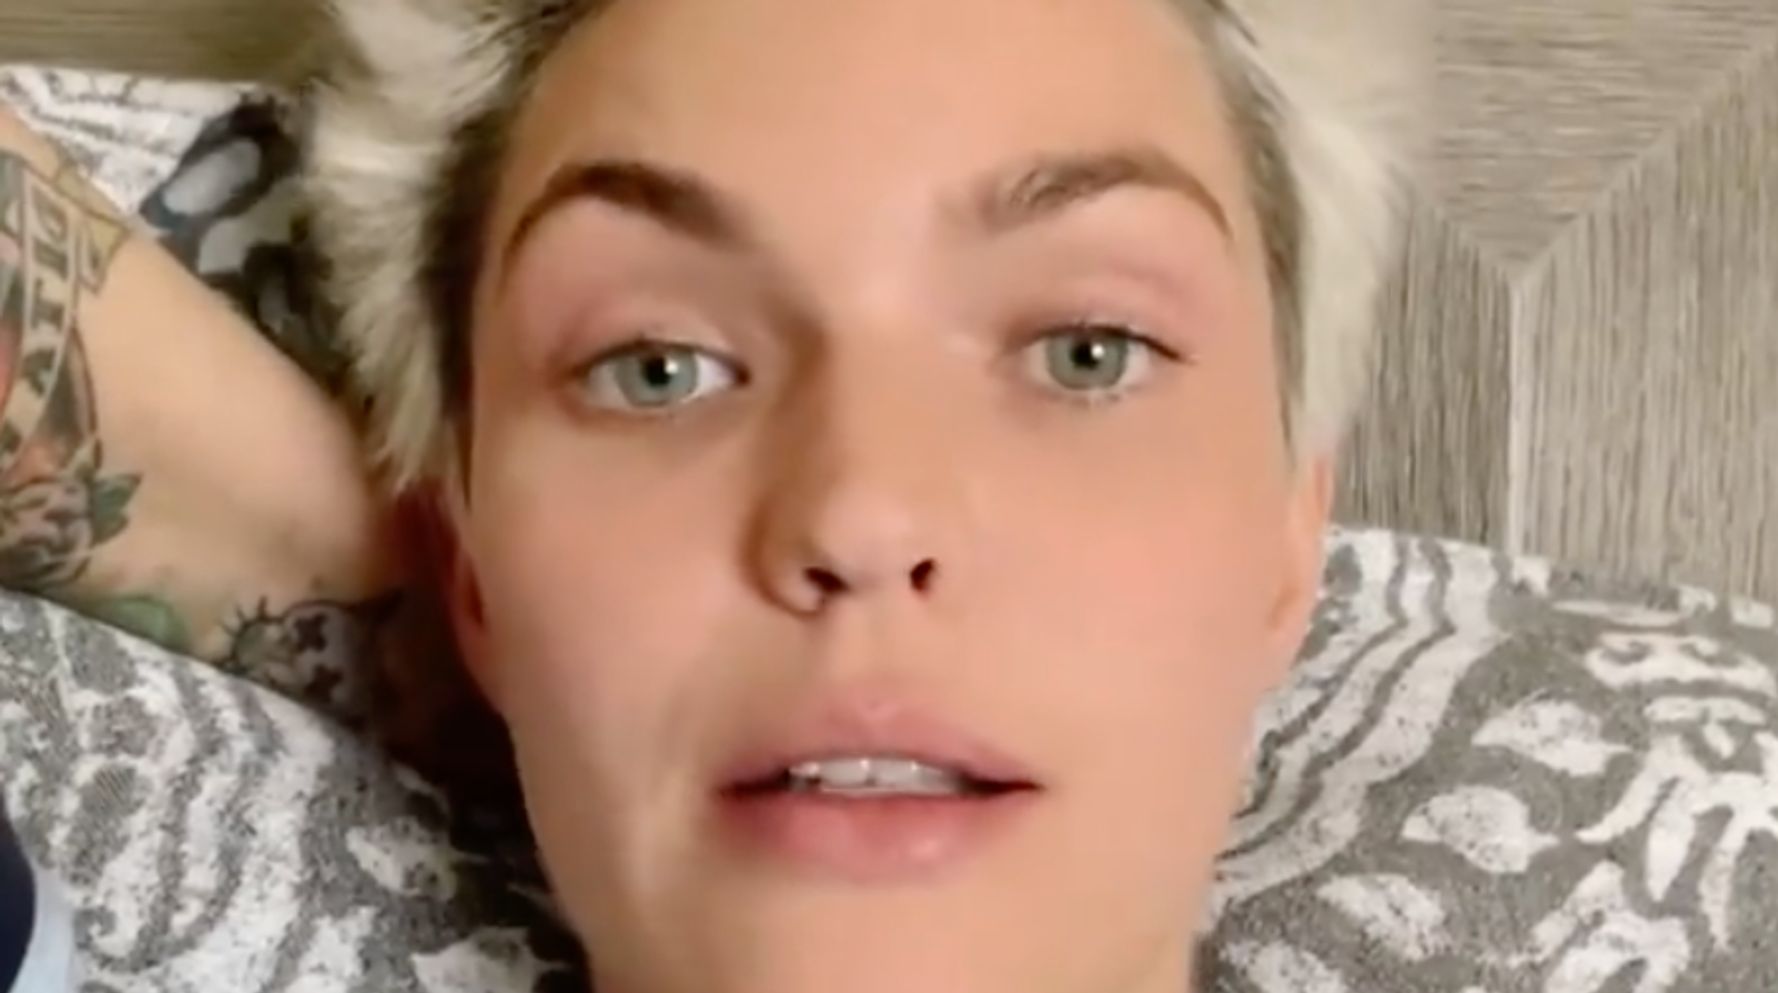 Ruby Rose Tearfully Describes ER Visit, Overcrowding Due To COVID